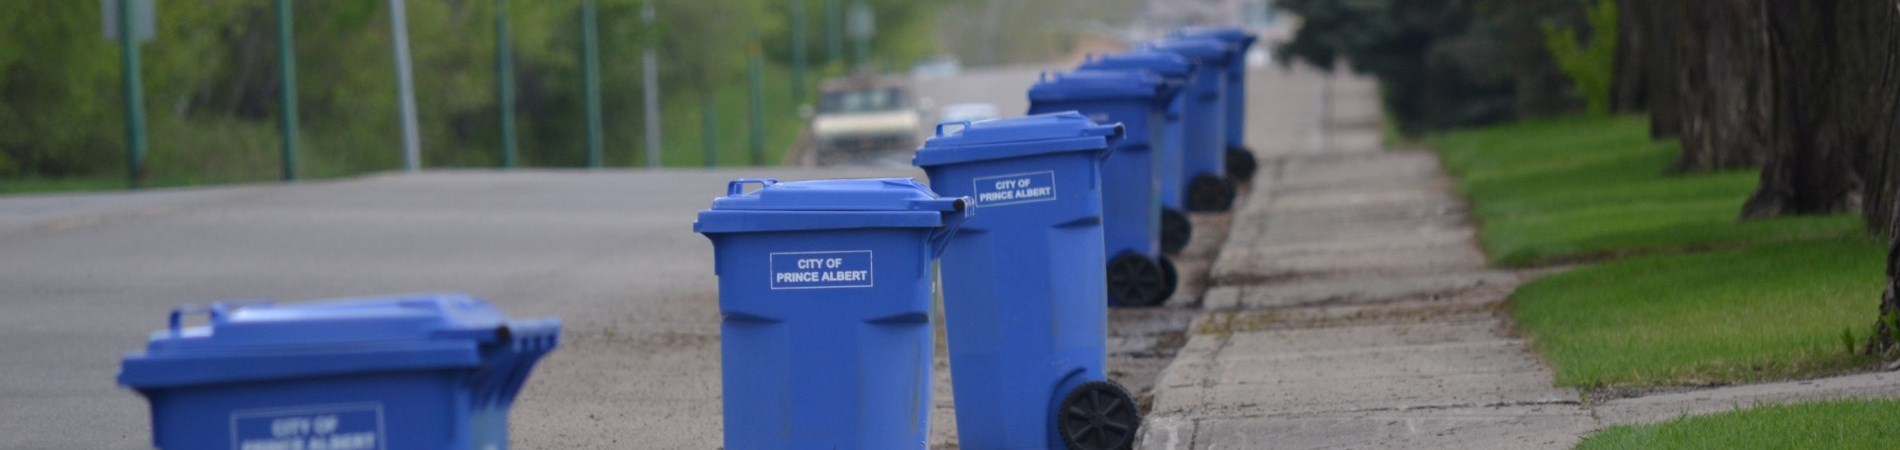 Recycling bins placed for collection